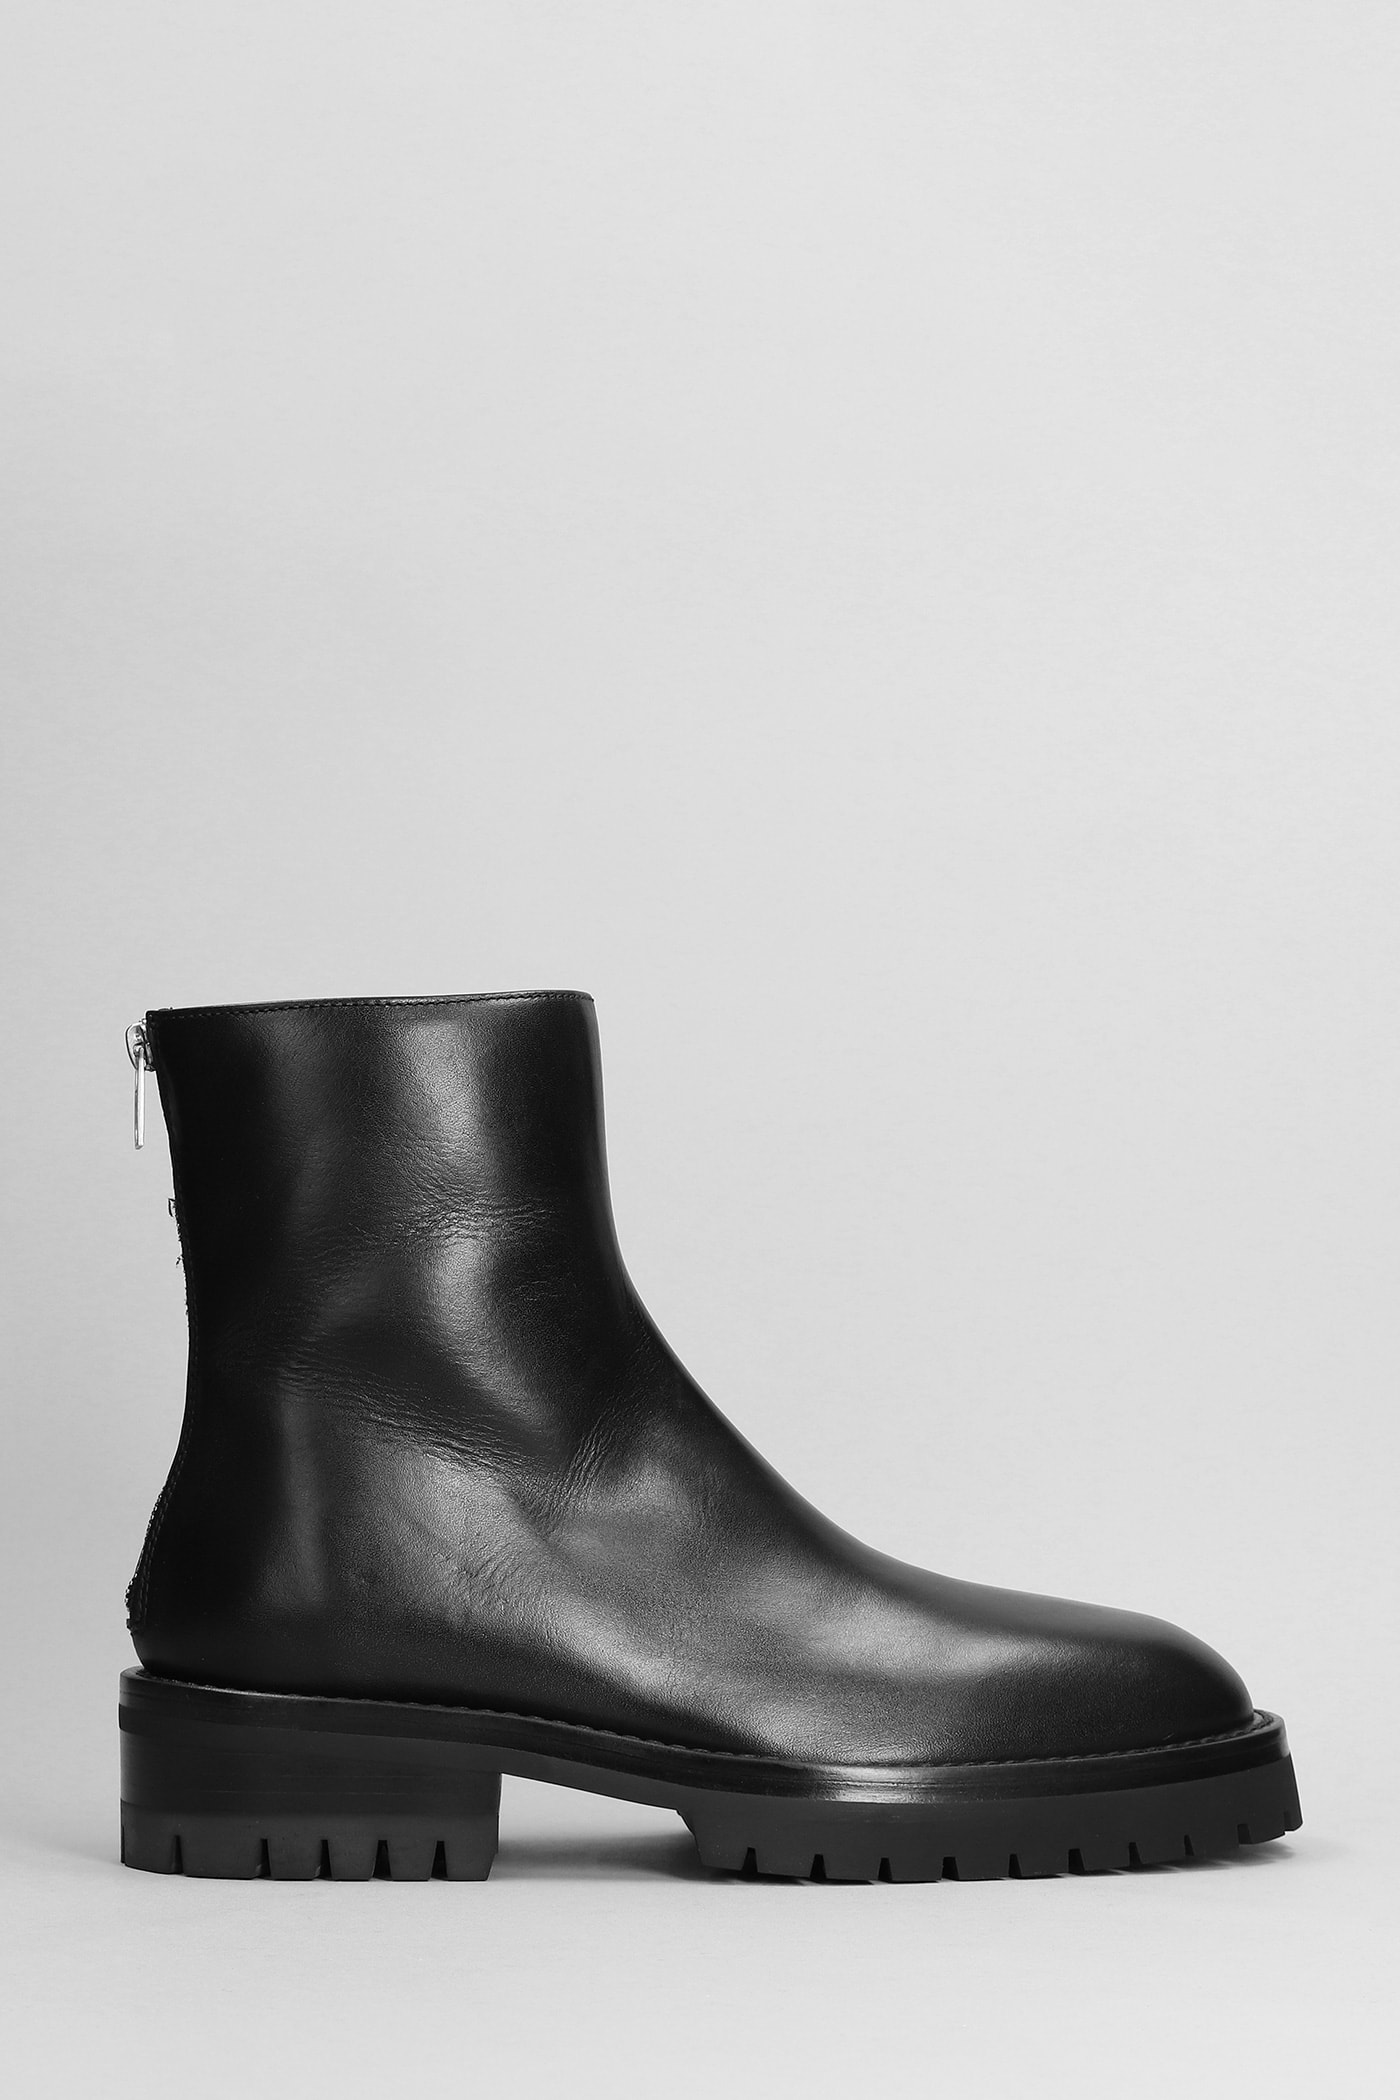 Ann Demeulemeester Ankle Boots In Black Leather